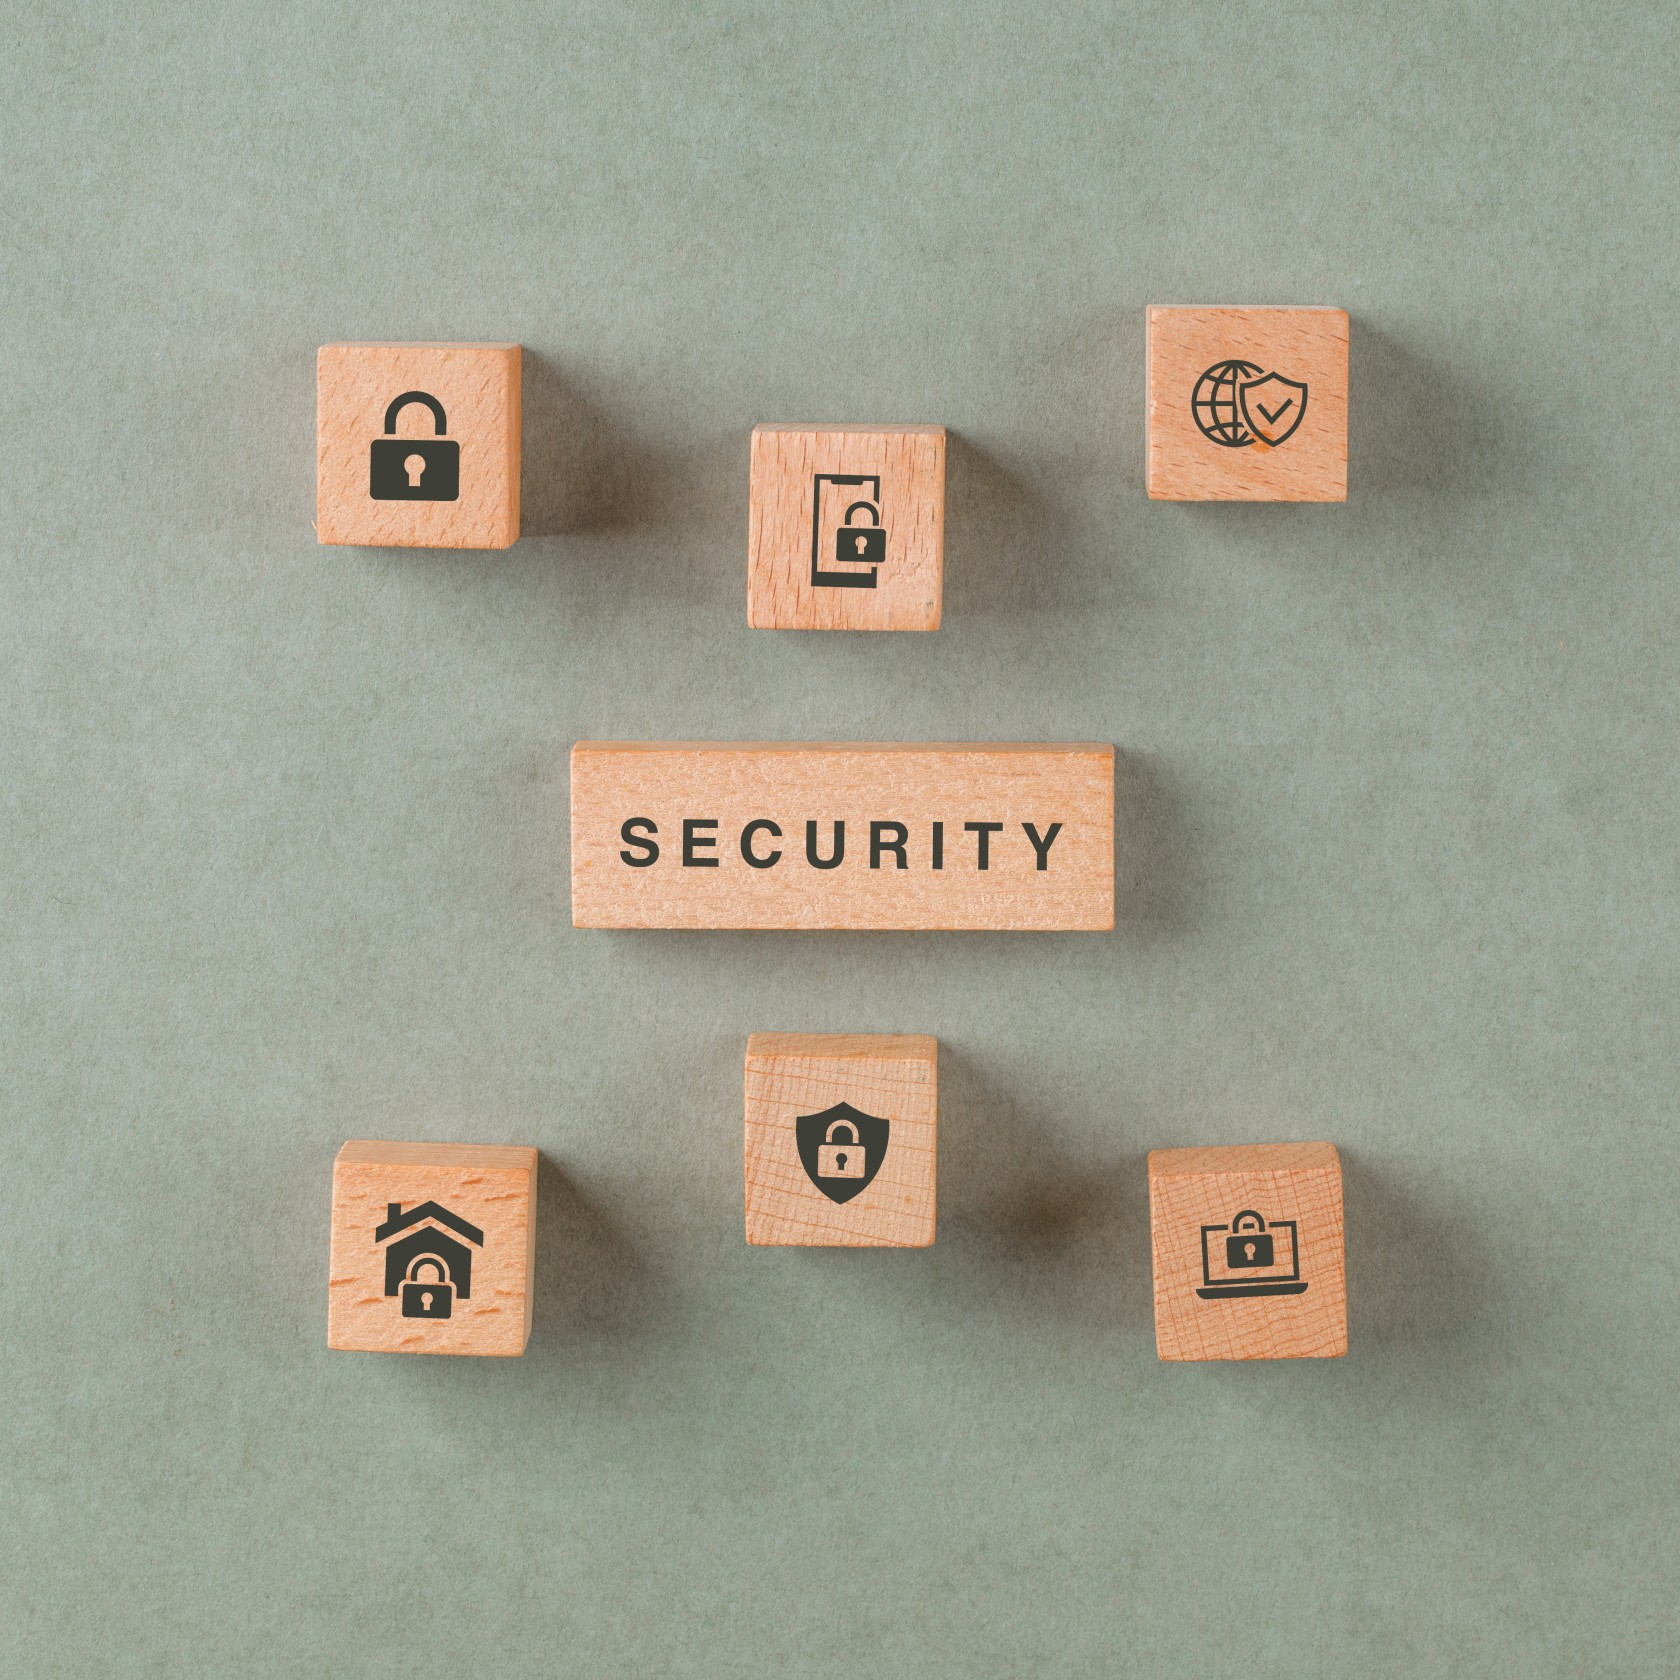 security-concept-with-wooden-blocks-with-icons.jpg